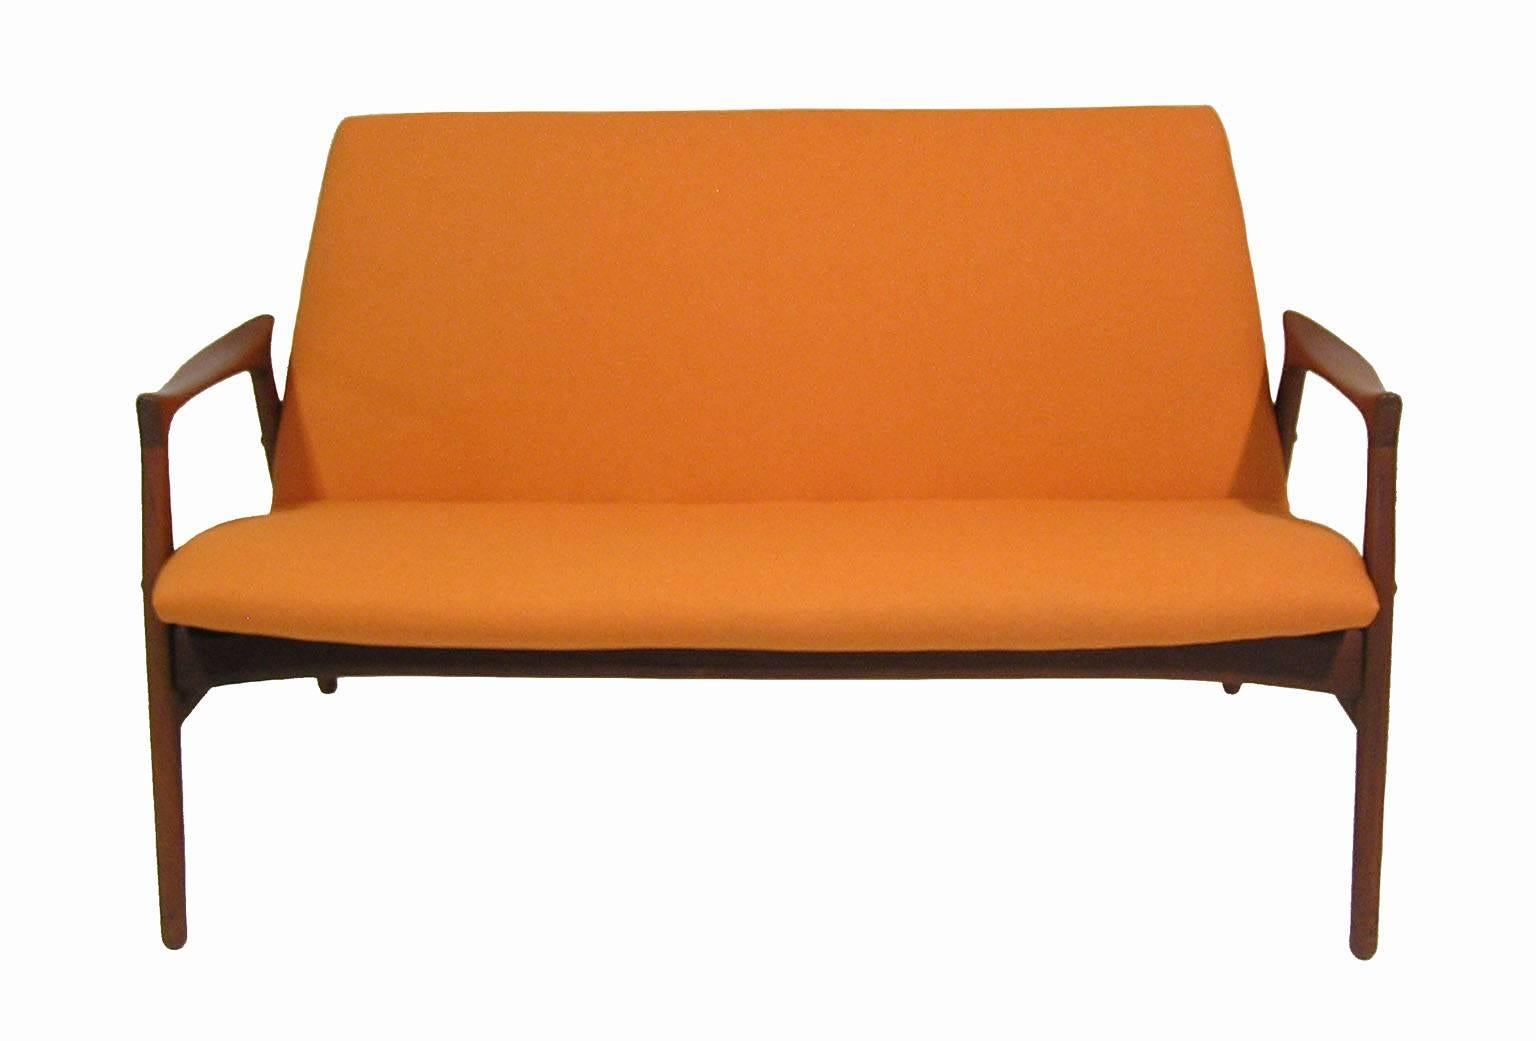 A stylish teak settee from the 1950s Danish Modern era by Hans Olsen of Denmark. Amazing craftsmanship throughout featuring a beautifully sculpted solid teak frame. Newly reupholstered in a orange fabric material and in overall excellent condition.